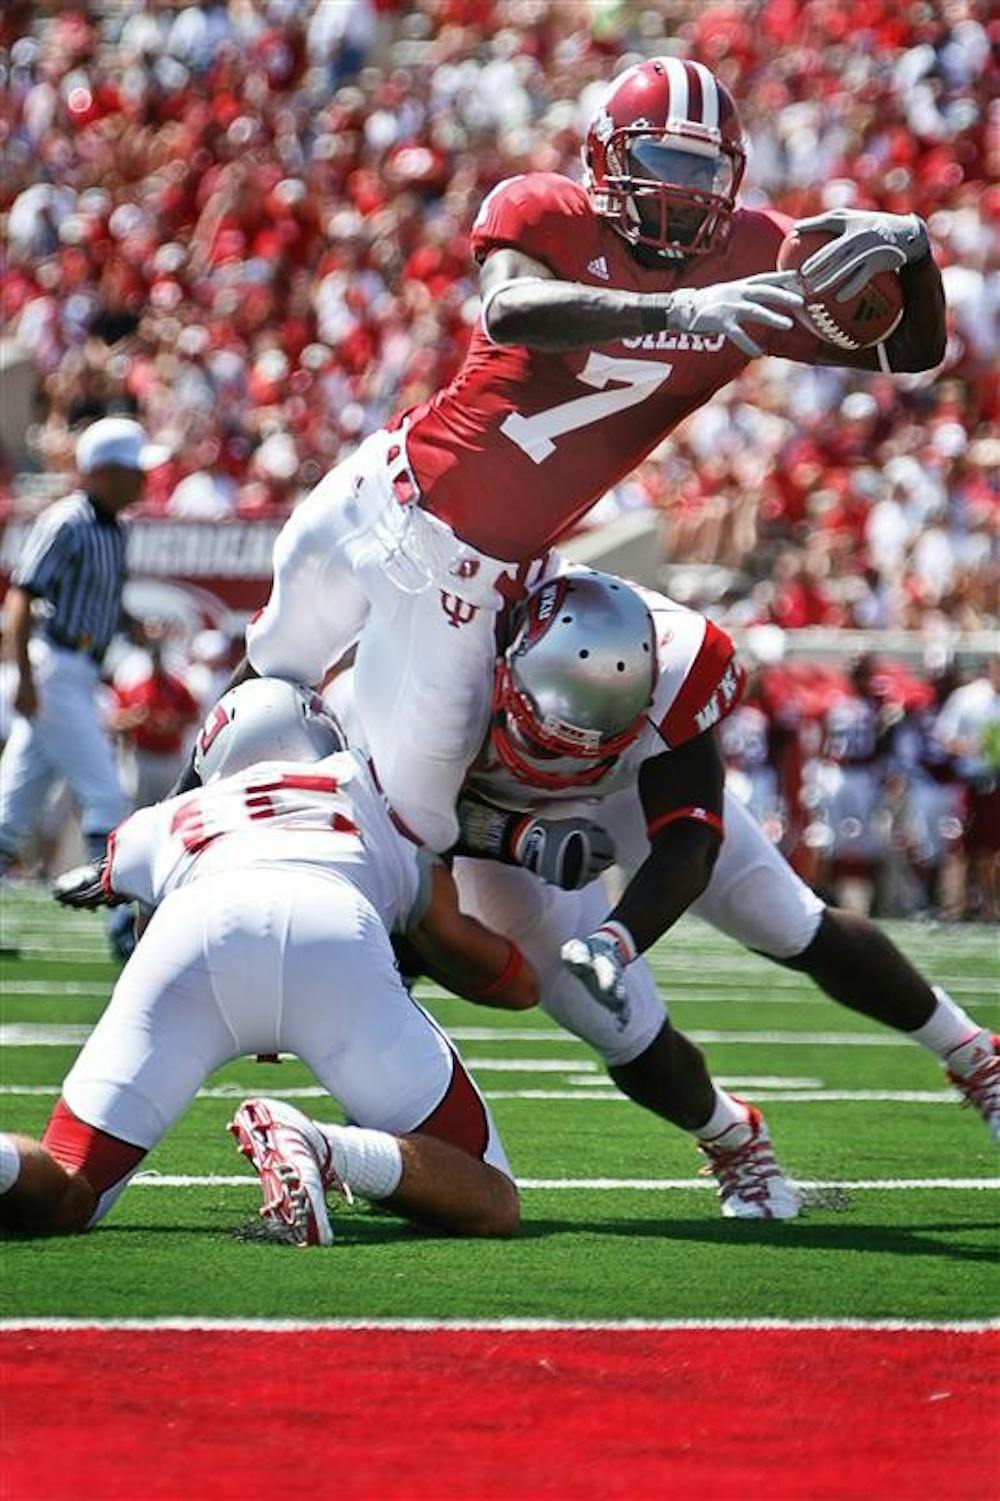 Junior wide receiver Ray Fisher leaps into the end zone over two Western Kentucky defenders during the Hoosiers' 31-13 win against the Hilltoppers Saturday at Memorial Stadium.